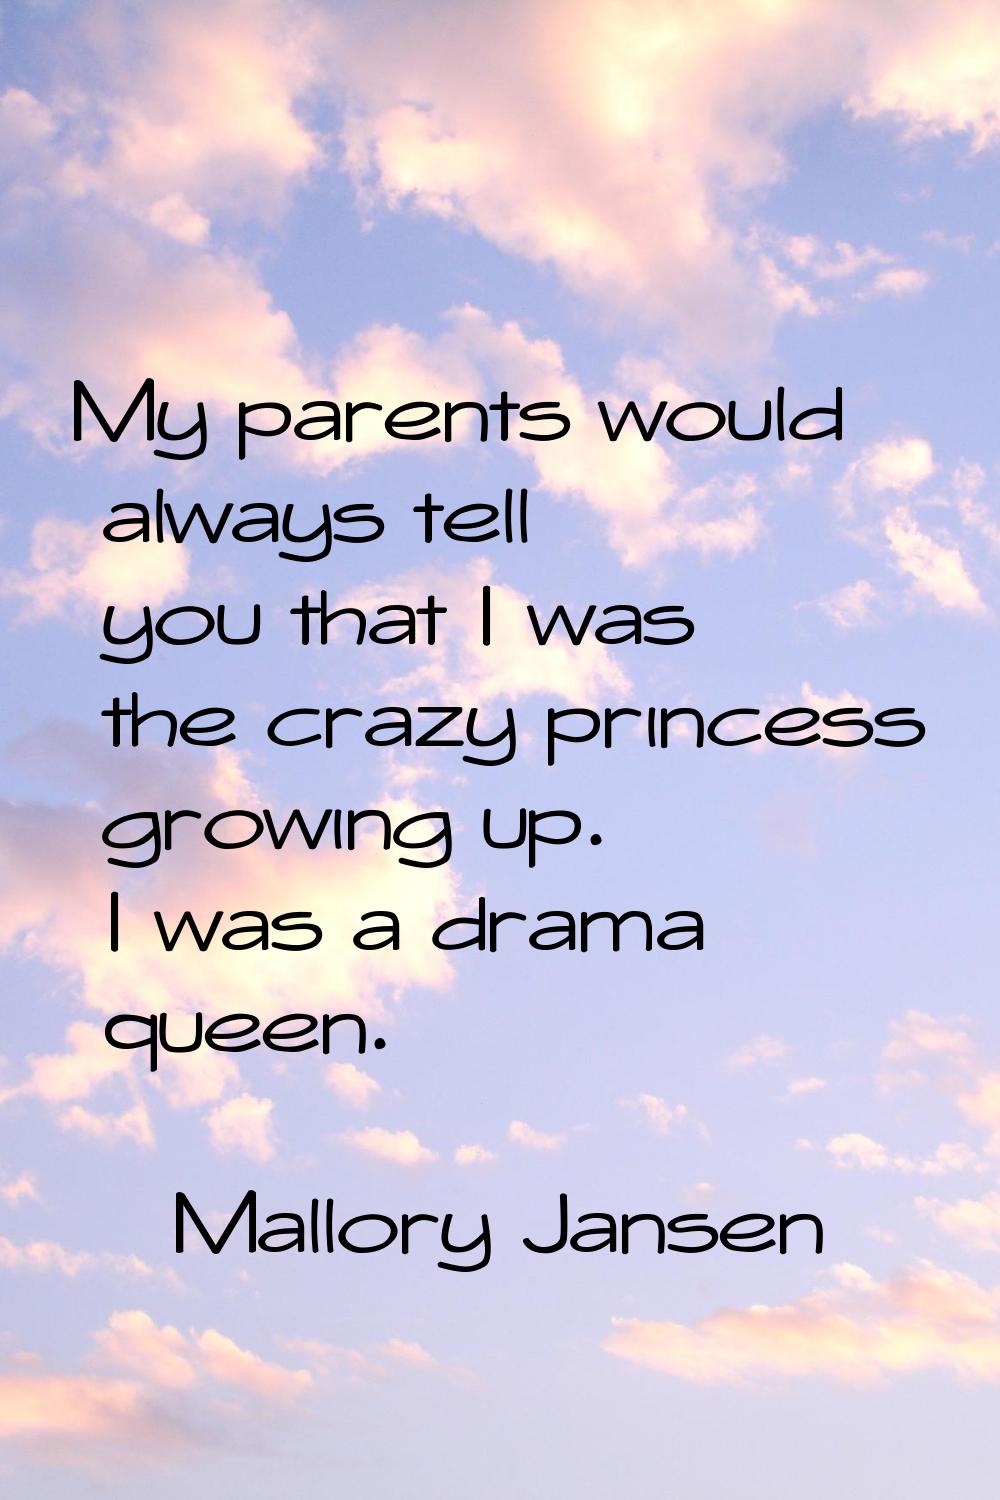 My parents would always tell you that I was the crazy princess growing up. I was a drama queen.